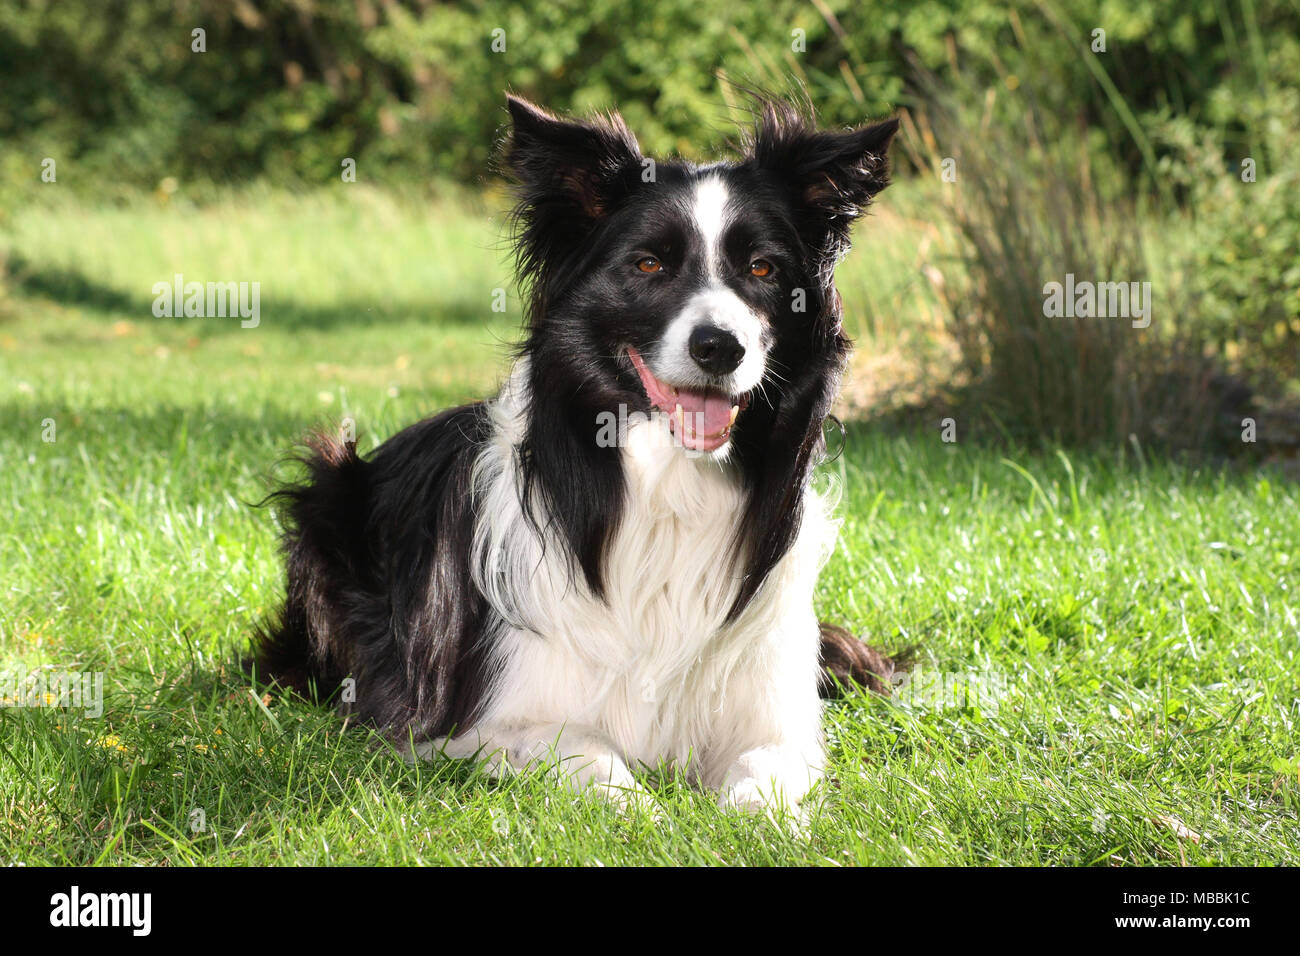 border collie, black and white, lying on a meadow Stock Photo